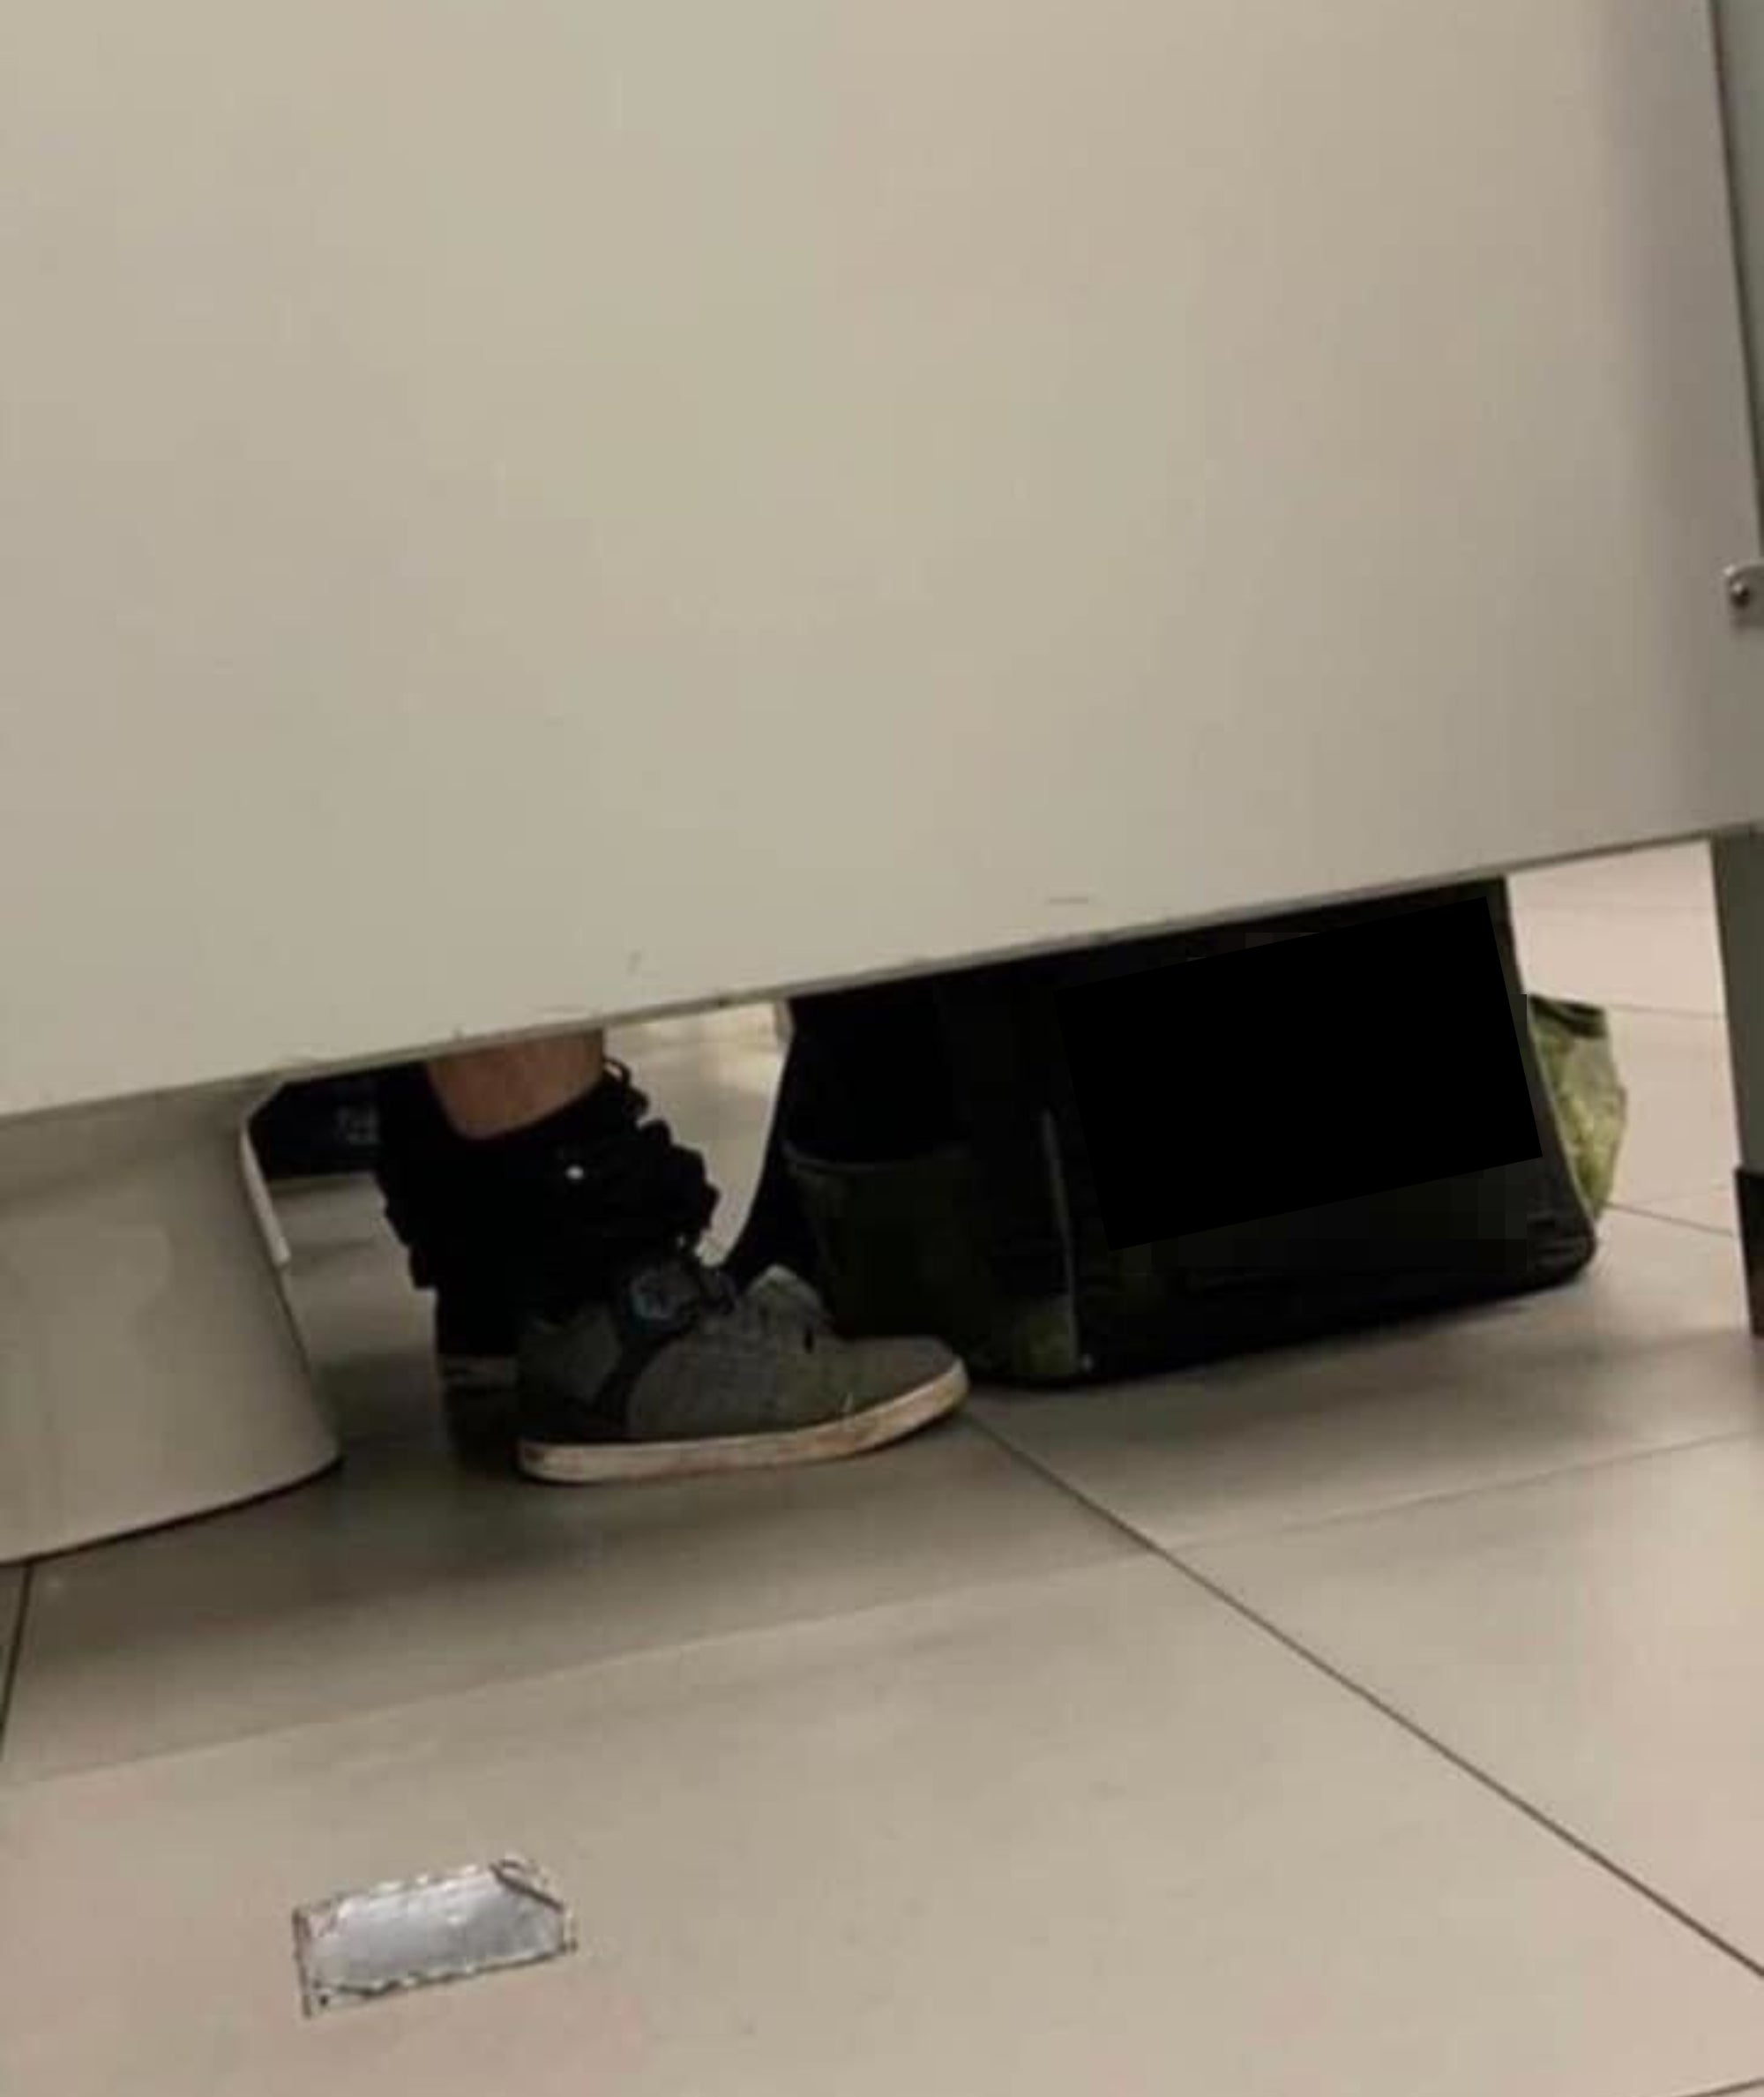 Person sitting in a public restroom stall with an Uber Eats bag visible on the floor under the door